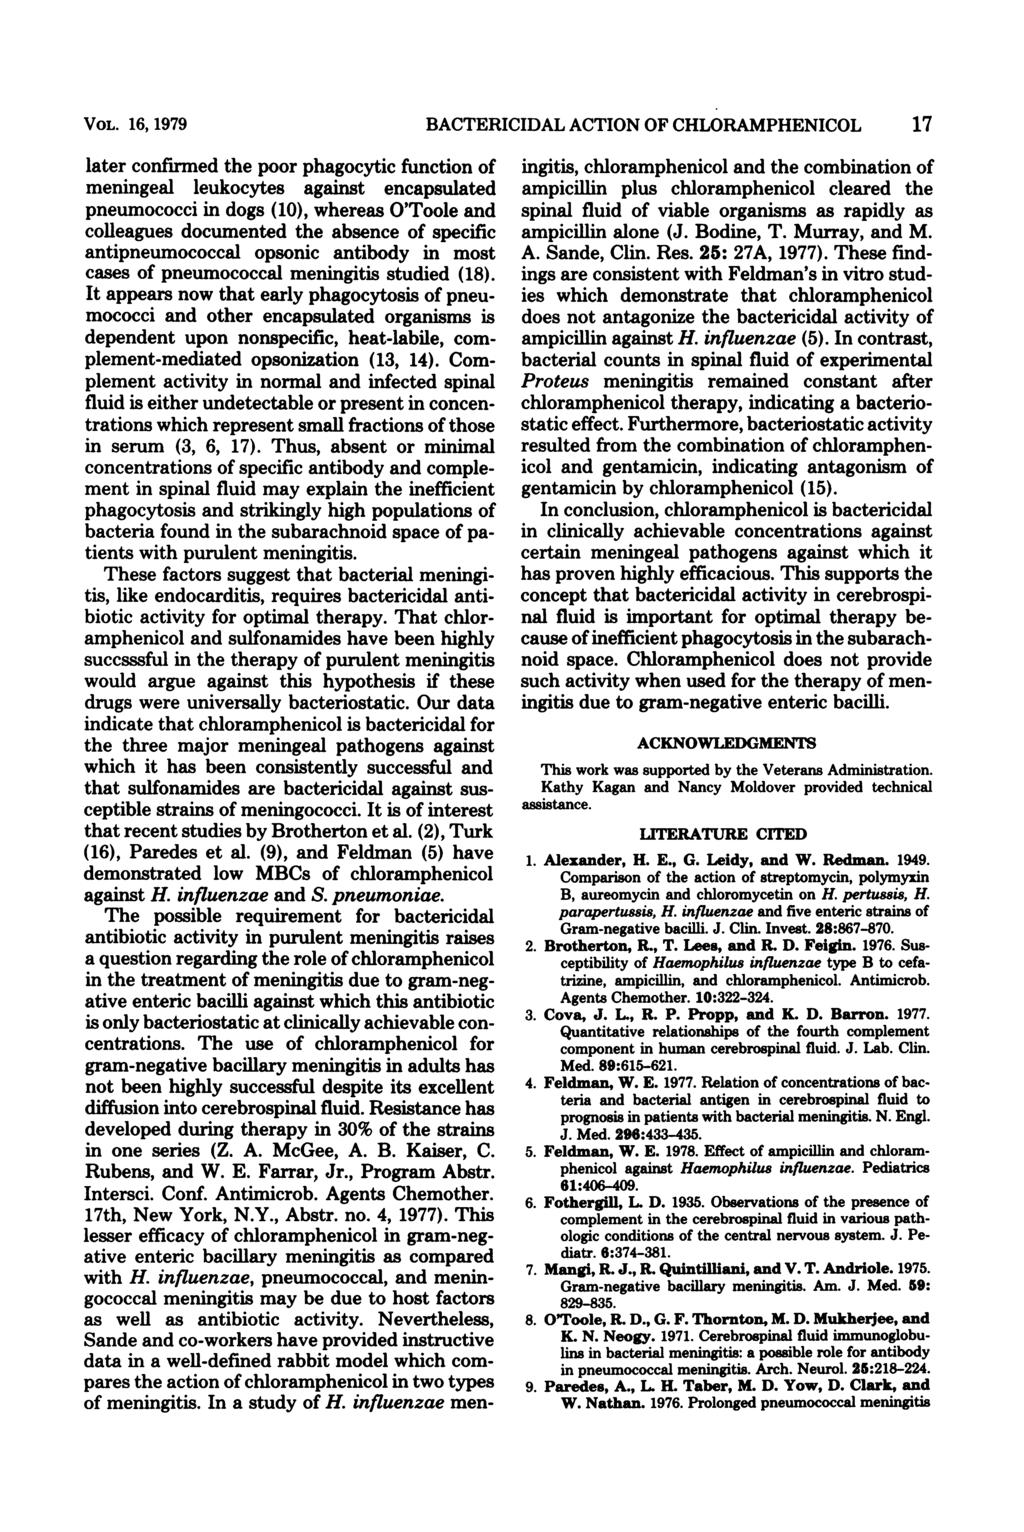 VOL. 16, 1979 BACTERICIDAL ACTION OF CHLORAMPHENICOL 17 later confirmed the poor phagocytic function of meningeal leukocytes against encapsulated pneumococci in dogs (1), whereas O'Toole and